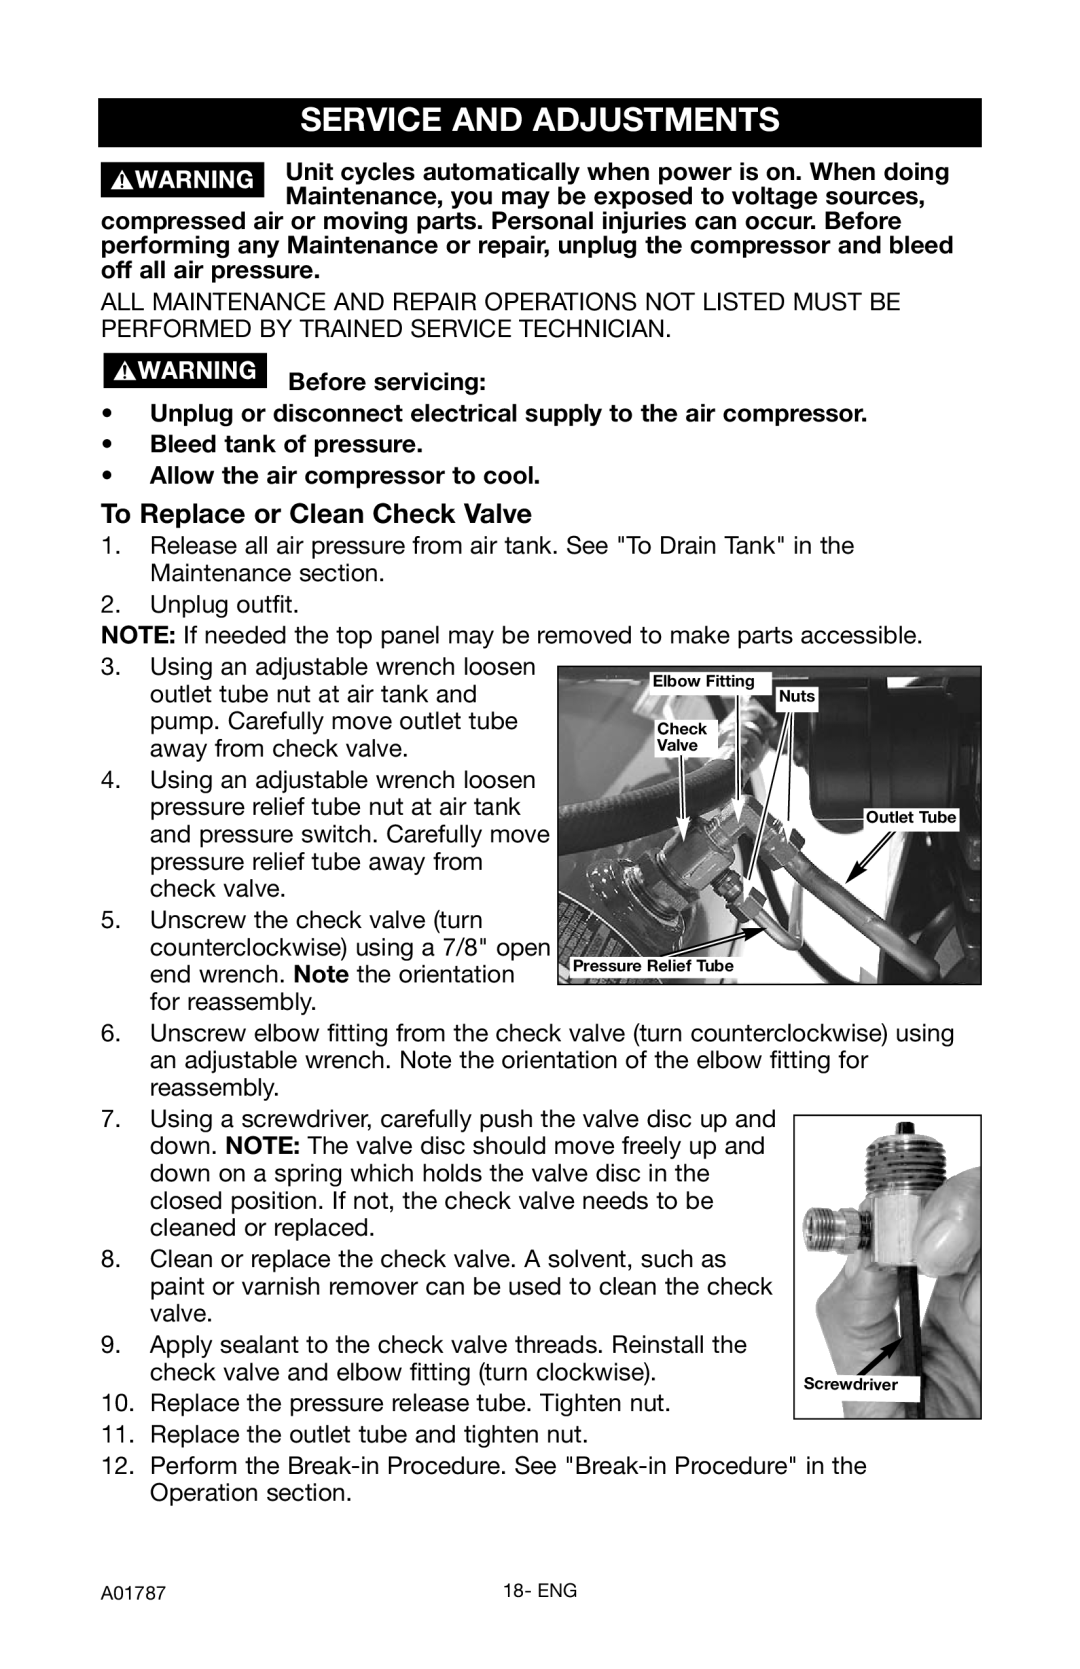 Porter-Cable CFFC350B, CFFR350B instruction manual Service And Adjustments, To Replace or Clean Check Valve 